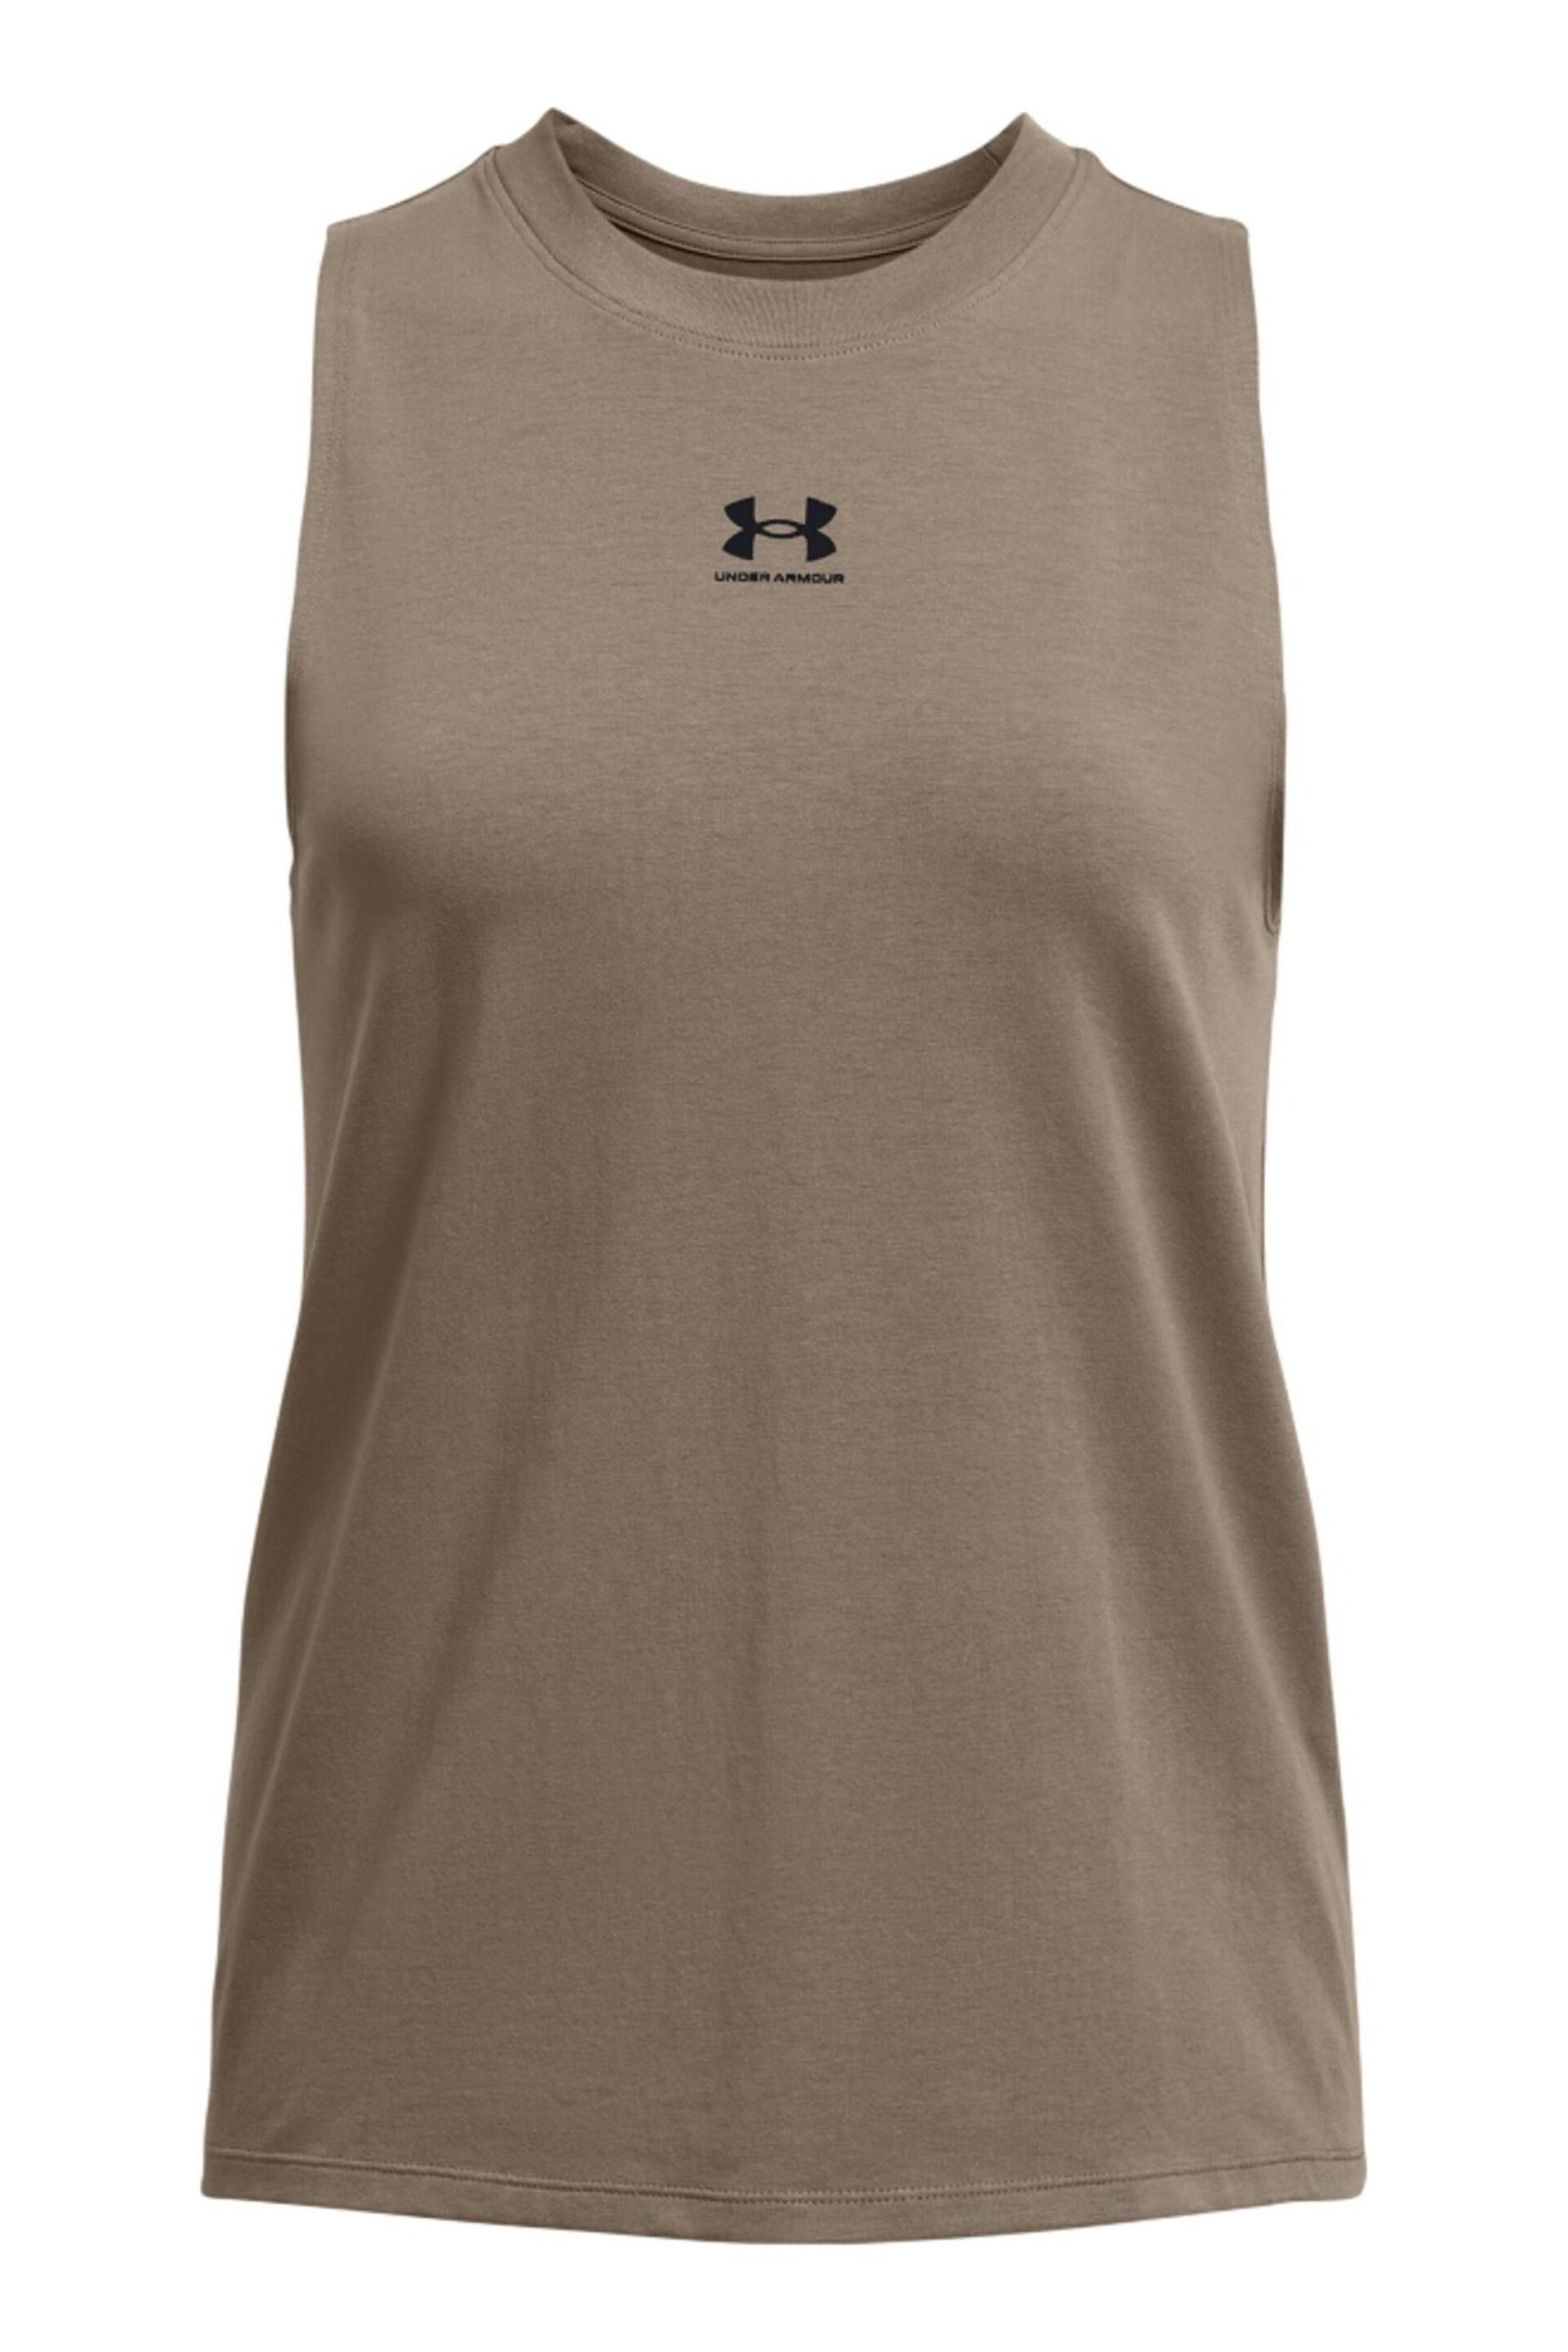 Under Armour Brown Campus Muscle Vest - Image 3 of 4